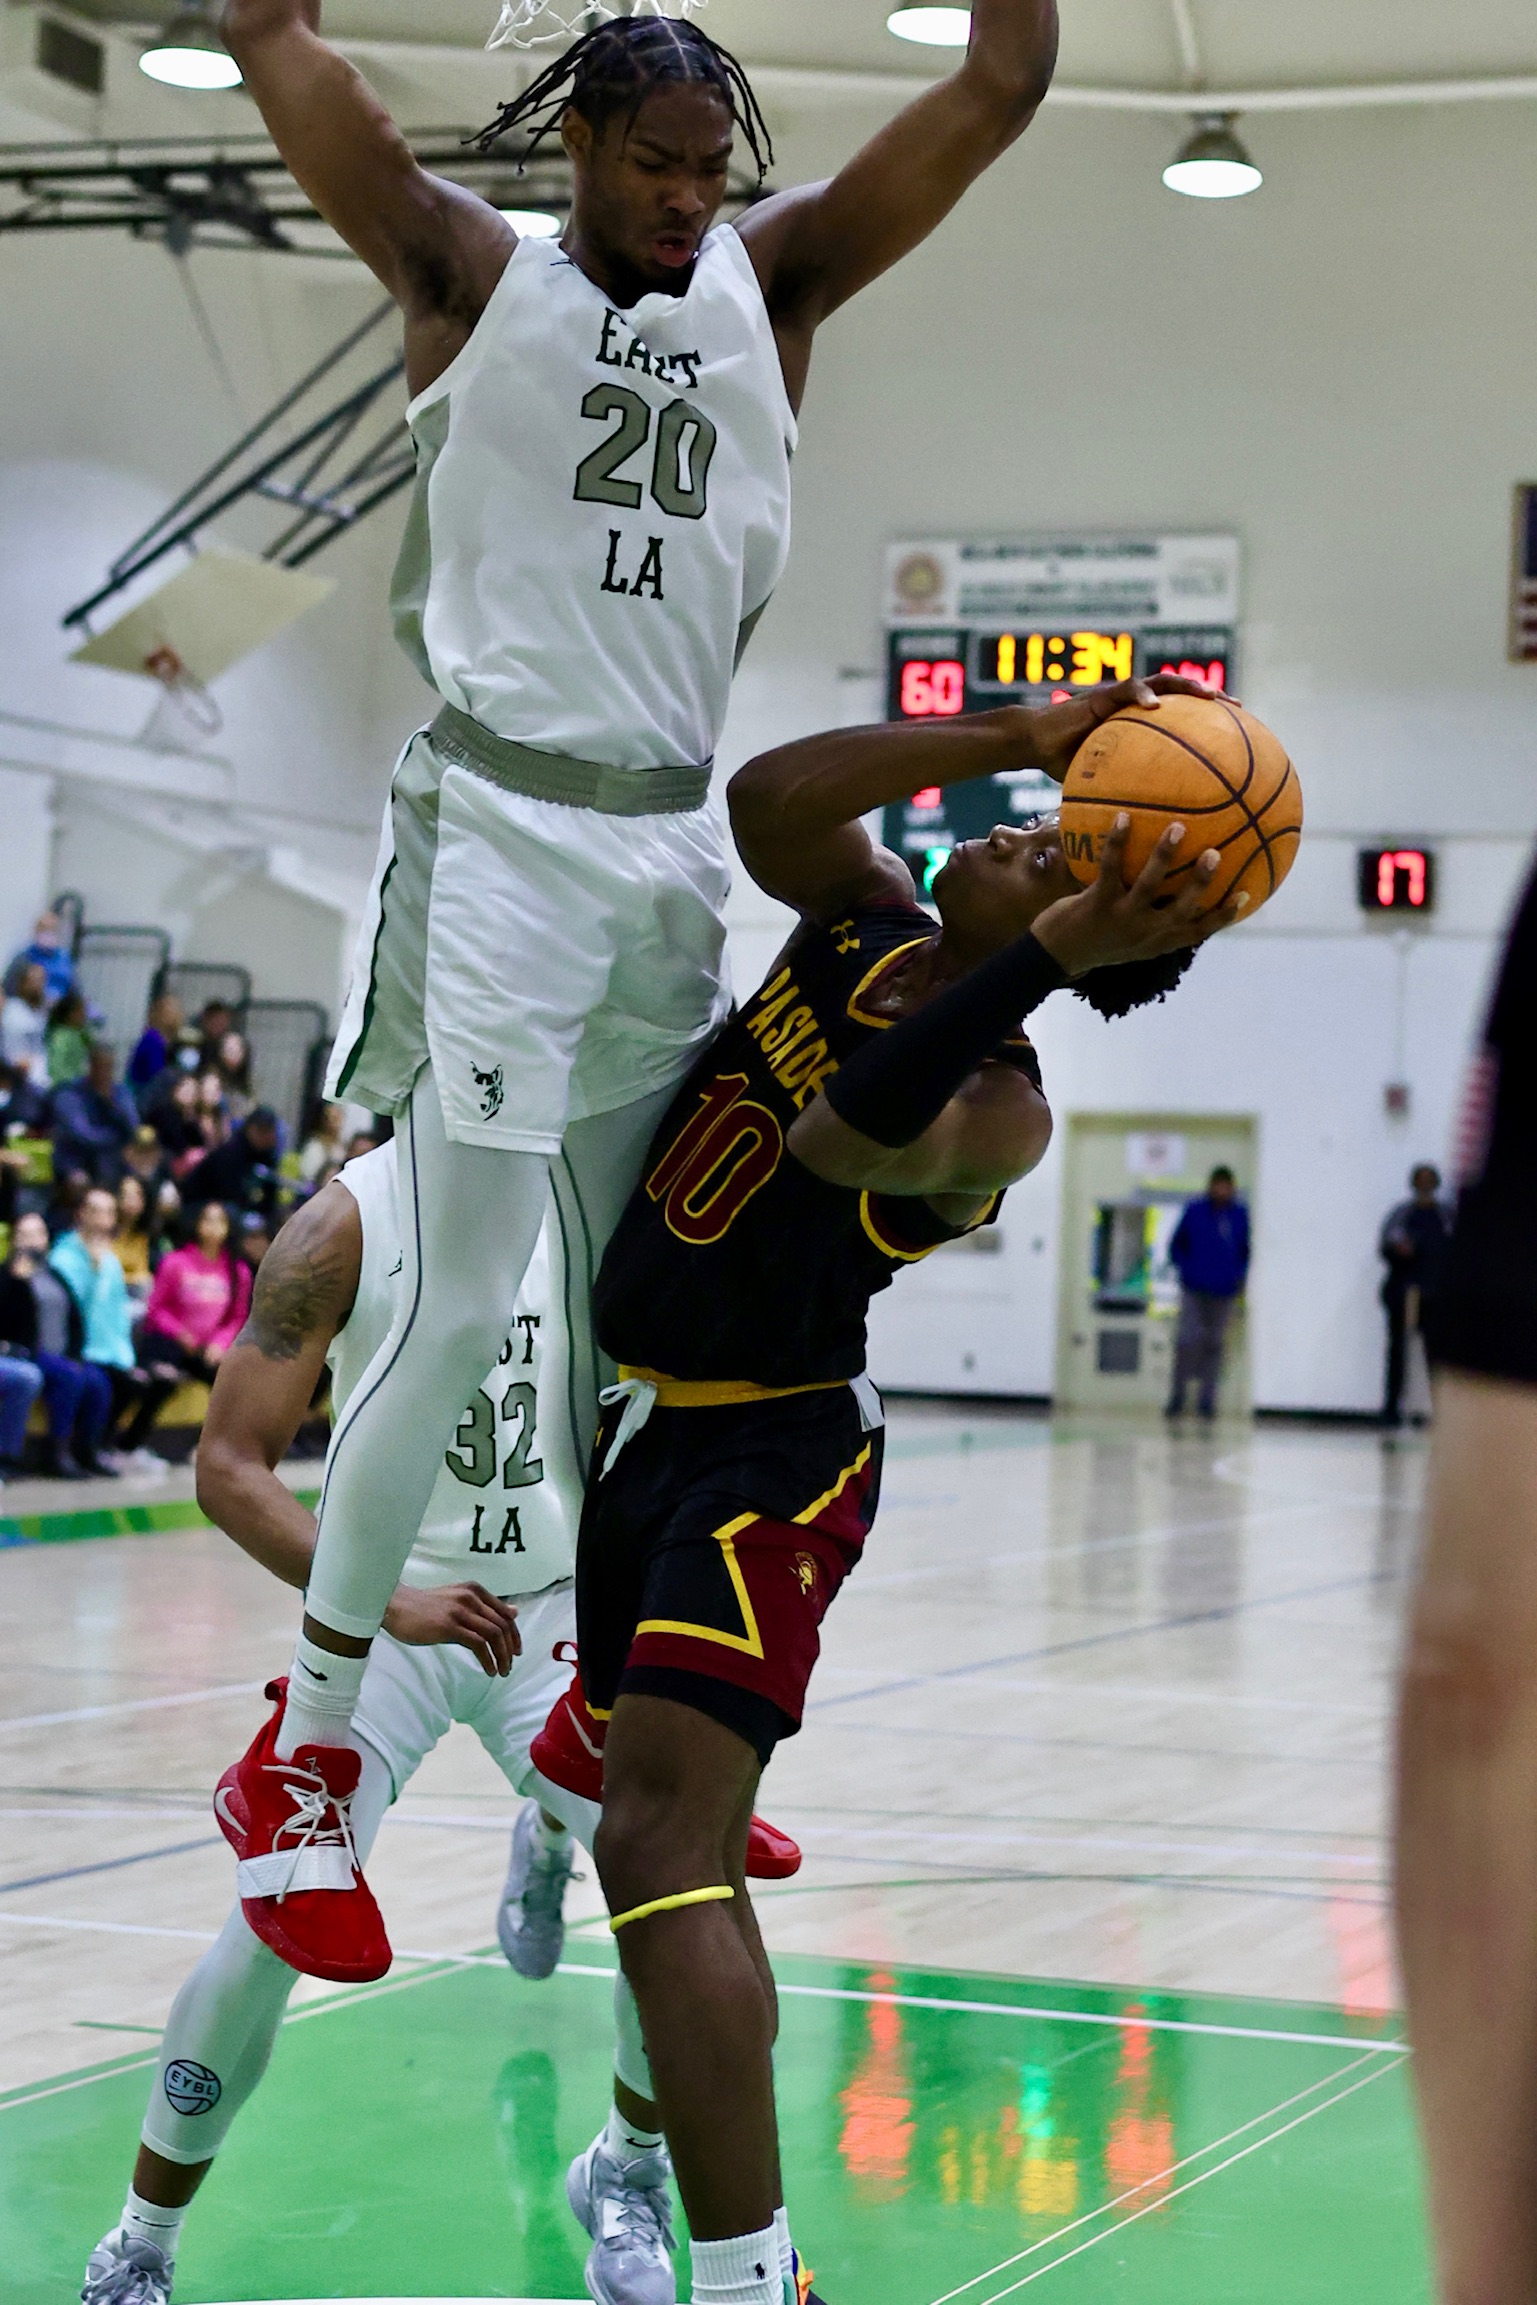 East LA's JT Langston towers over Pasadena's Jonthan Tchengang in a recent SCC game (photo by Michael Watkins).